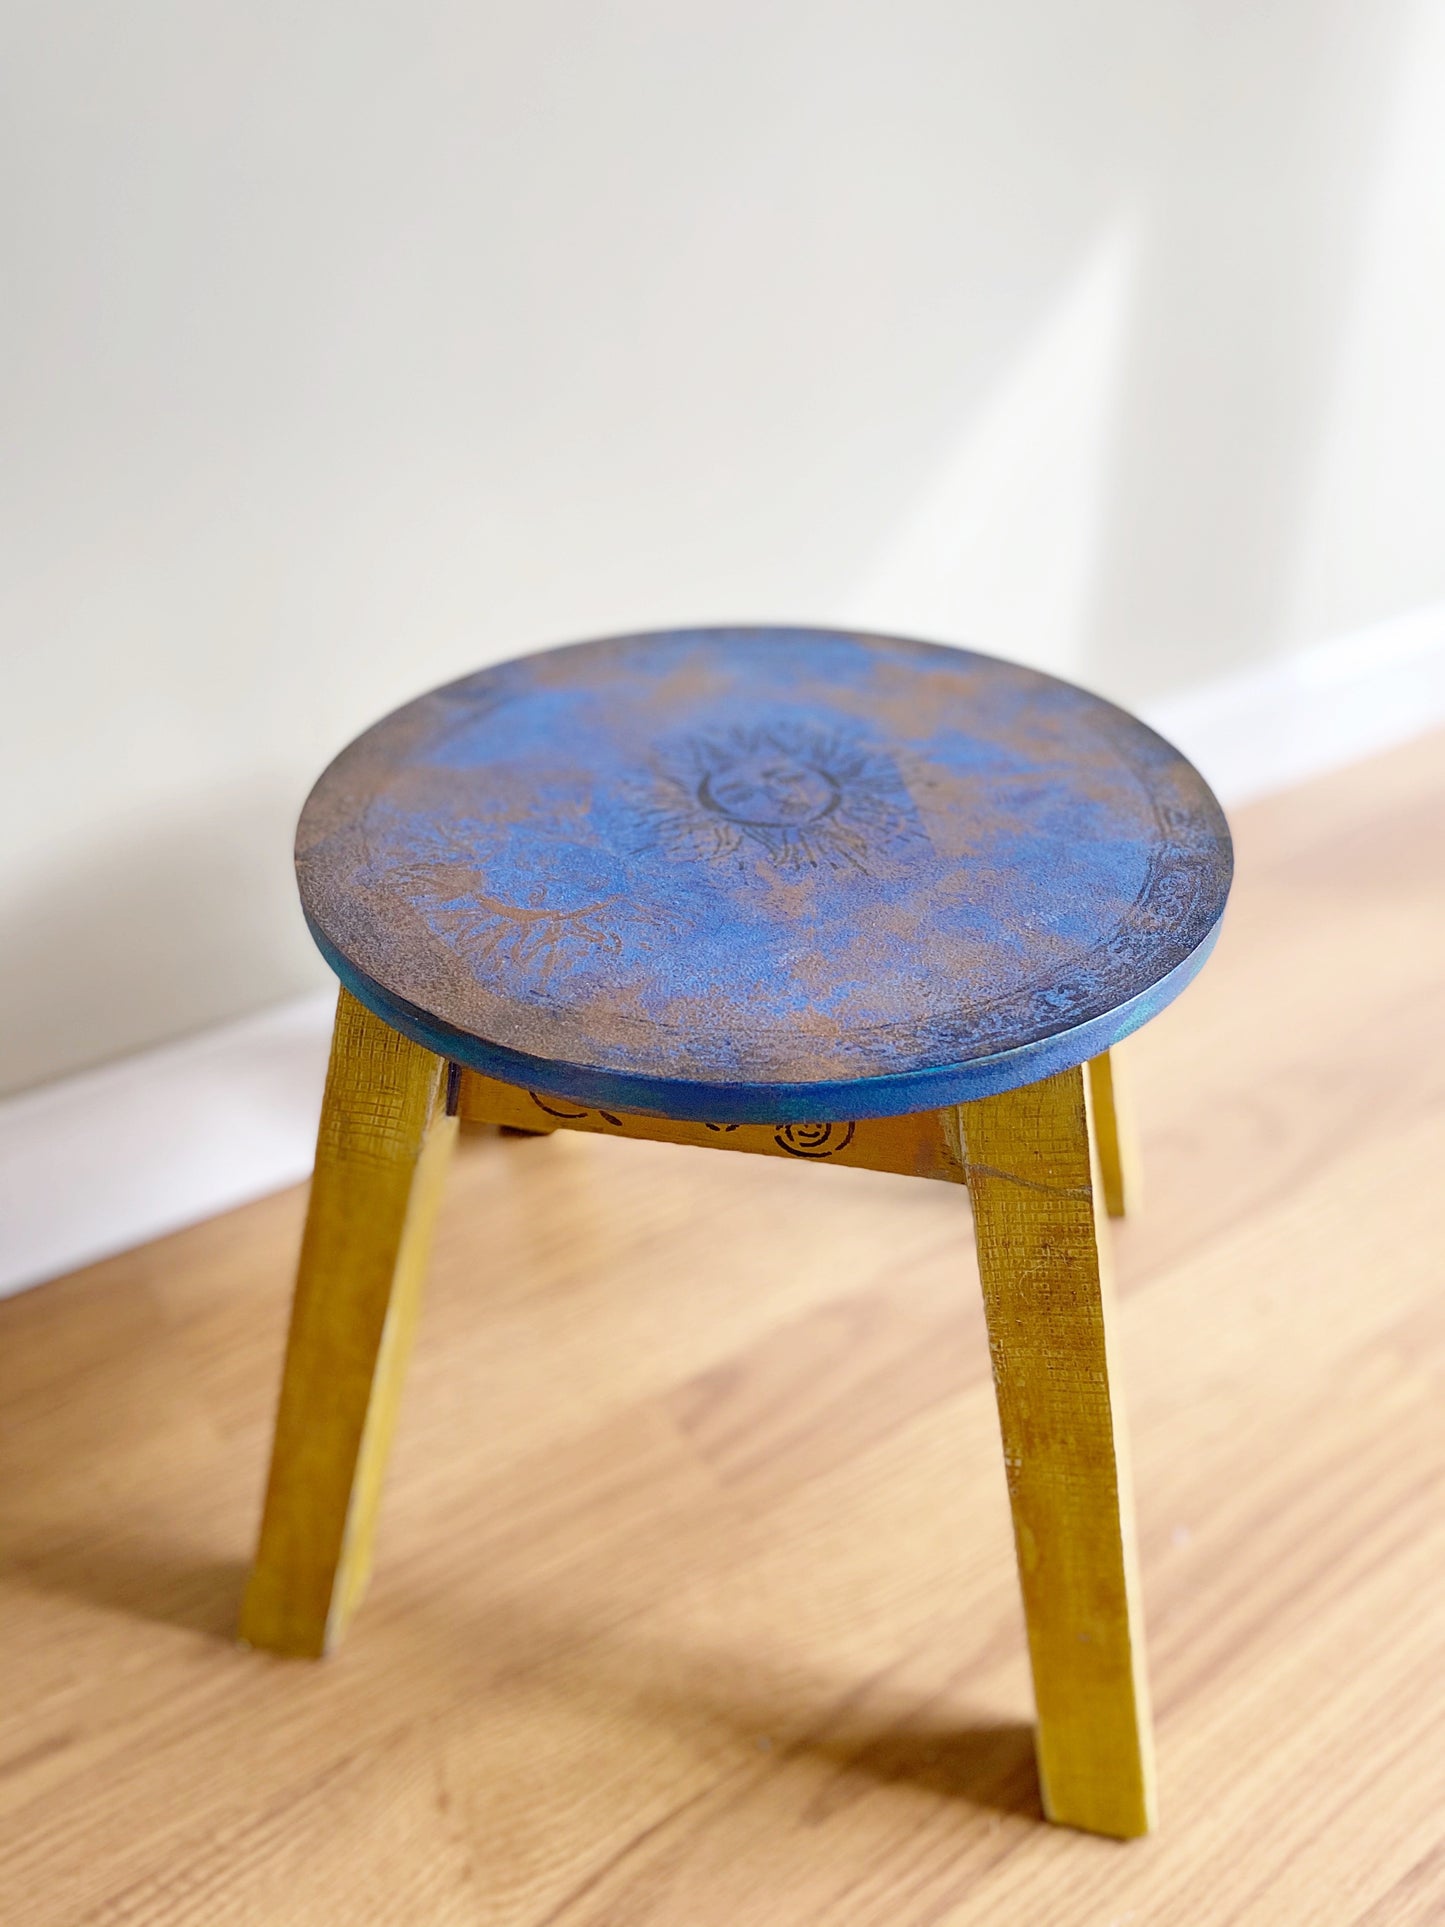 Blue Sun Stool or Plant Stand - hand painted - blue - bohemian - furniture art - blue - folk art- hand painted - shabby chic